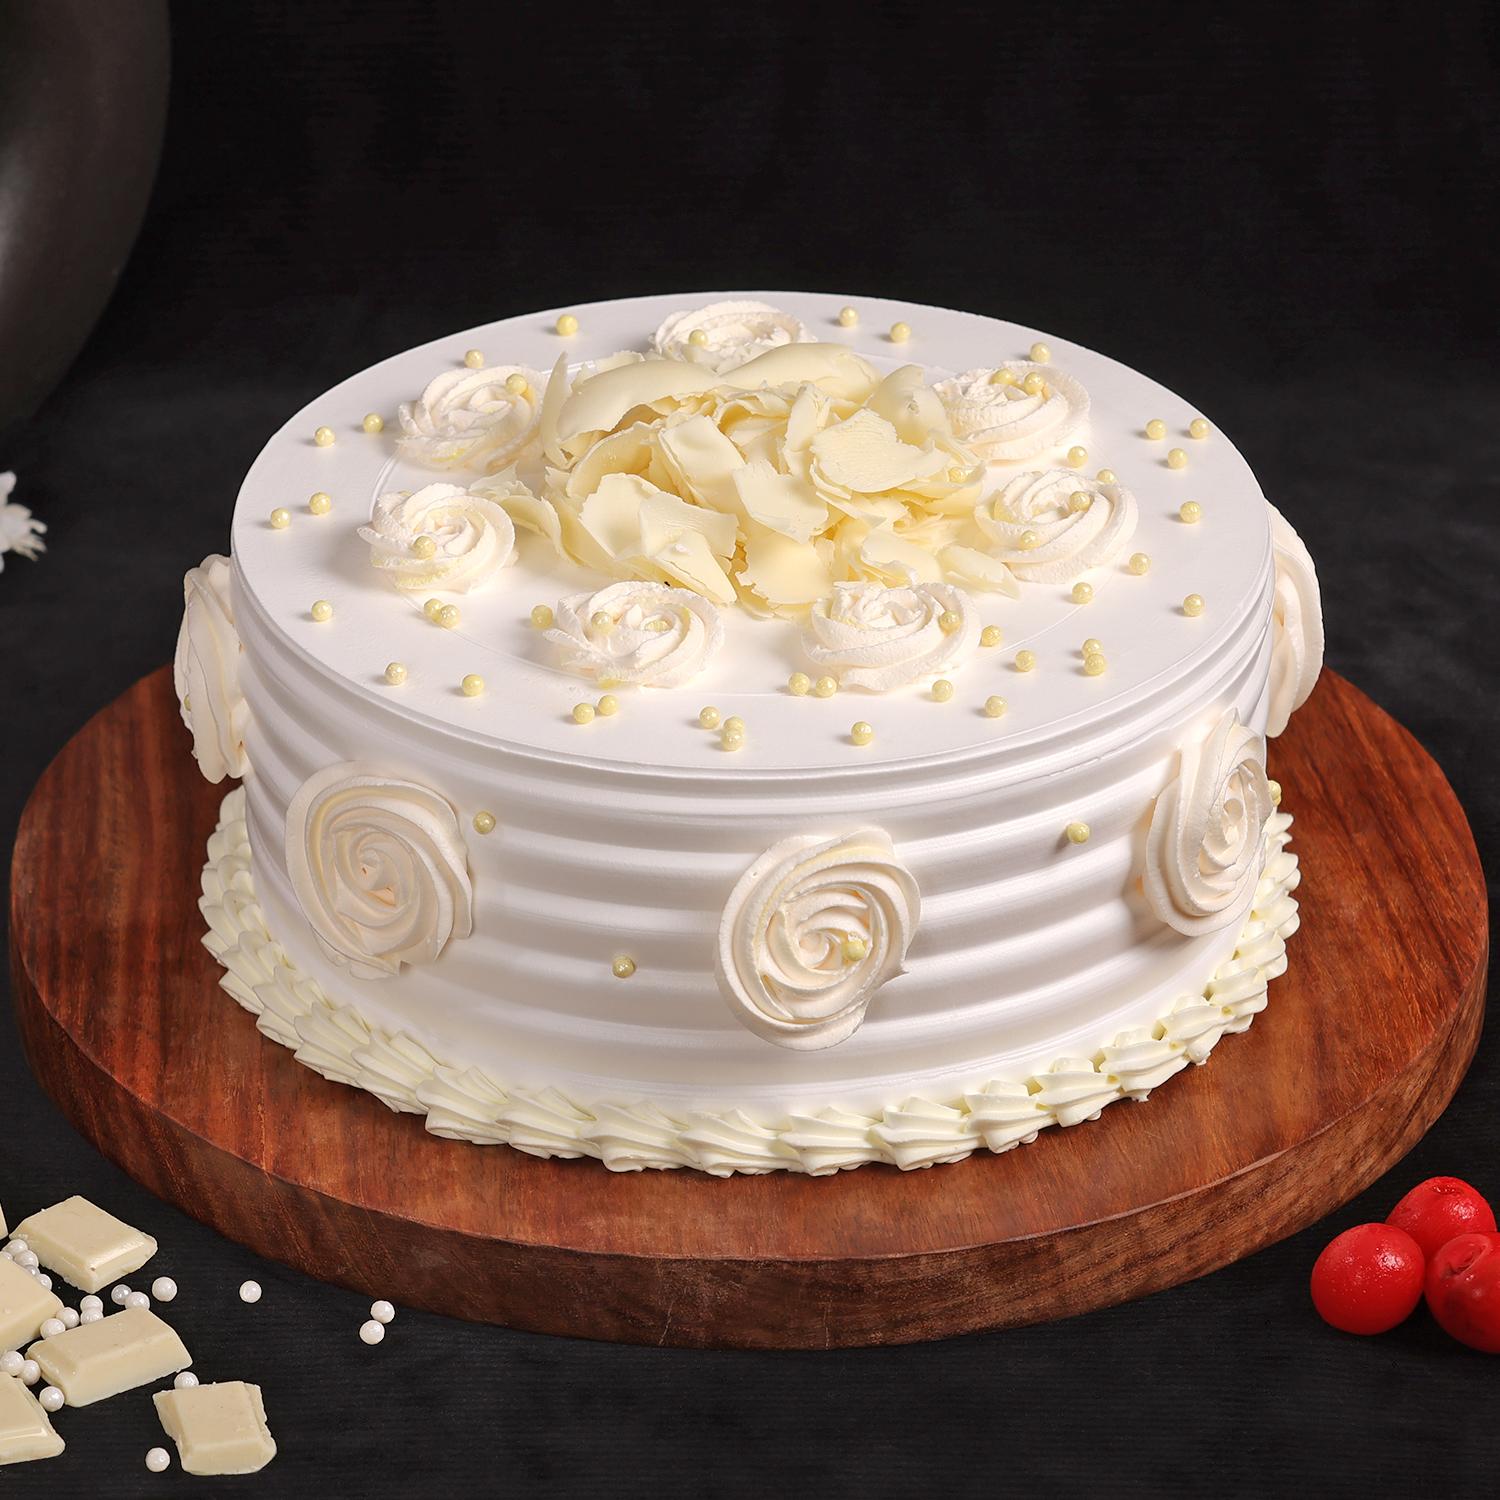 Winni Cakes And More in jankipuram extension,Lucknow - Best Cake Shops in  Lucknow - Justdial